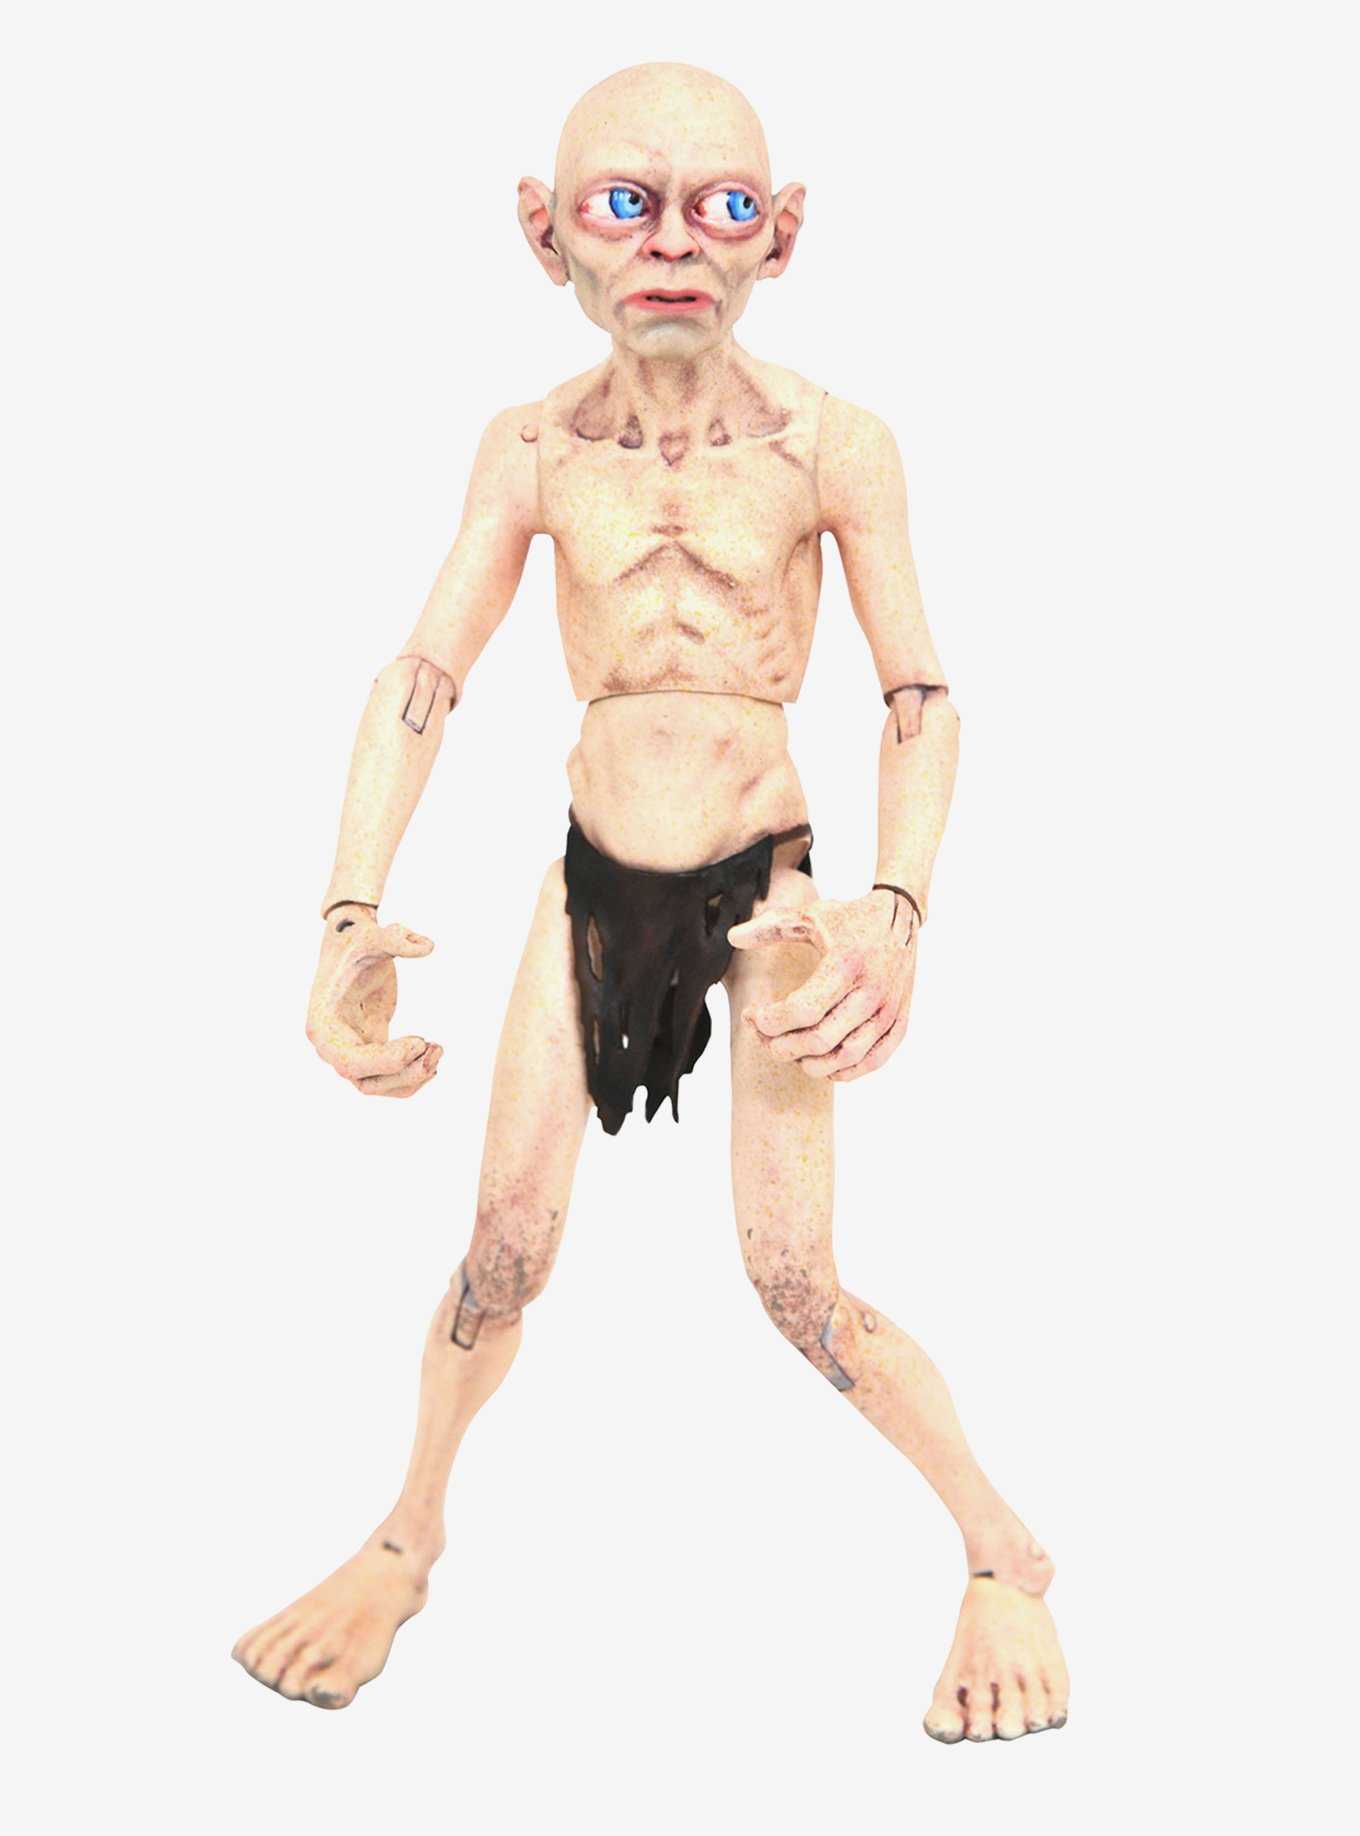 First Look: New Deluxe Lord of the Rings Gollum and Smeagol Action